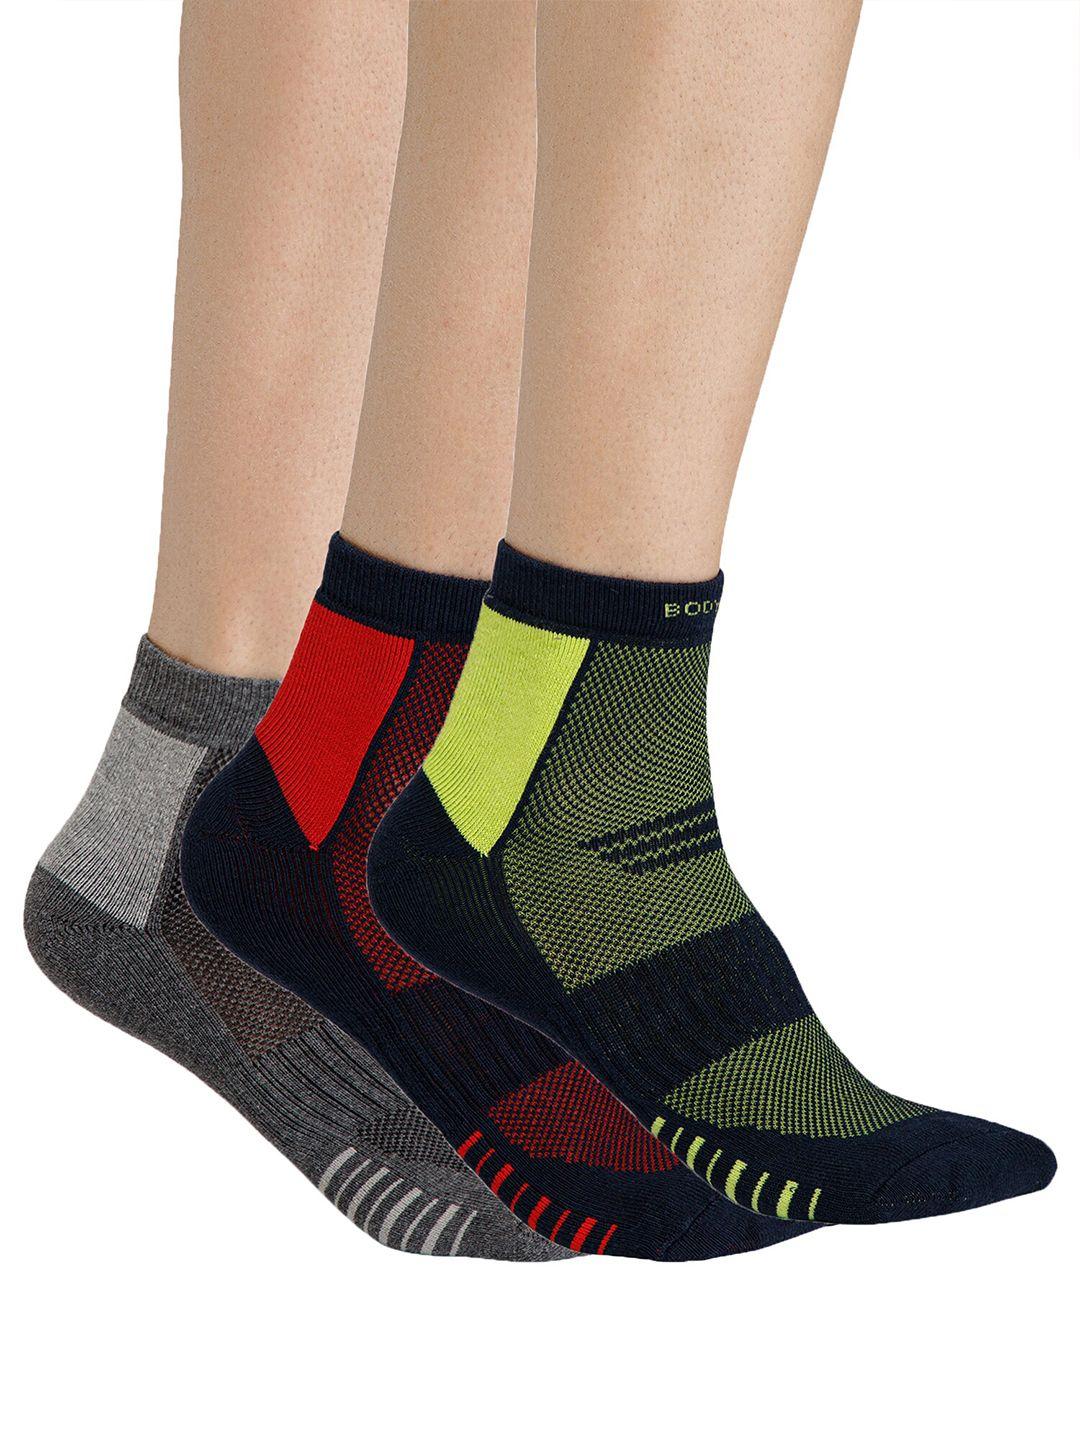 bodycare men pack of 3 assorted patterned cotton above ankle length socks